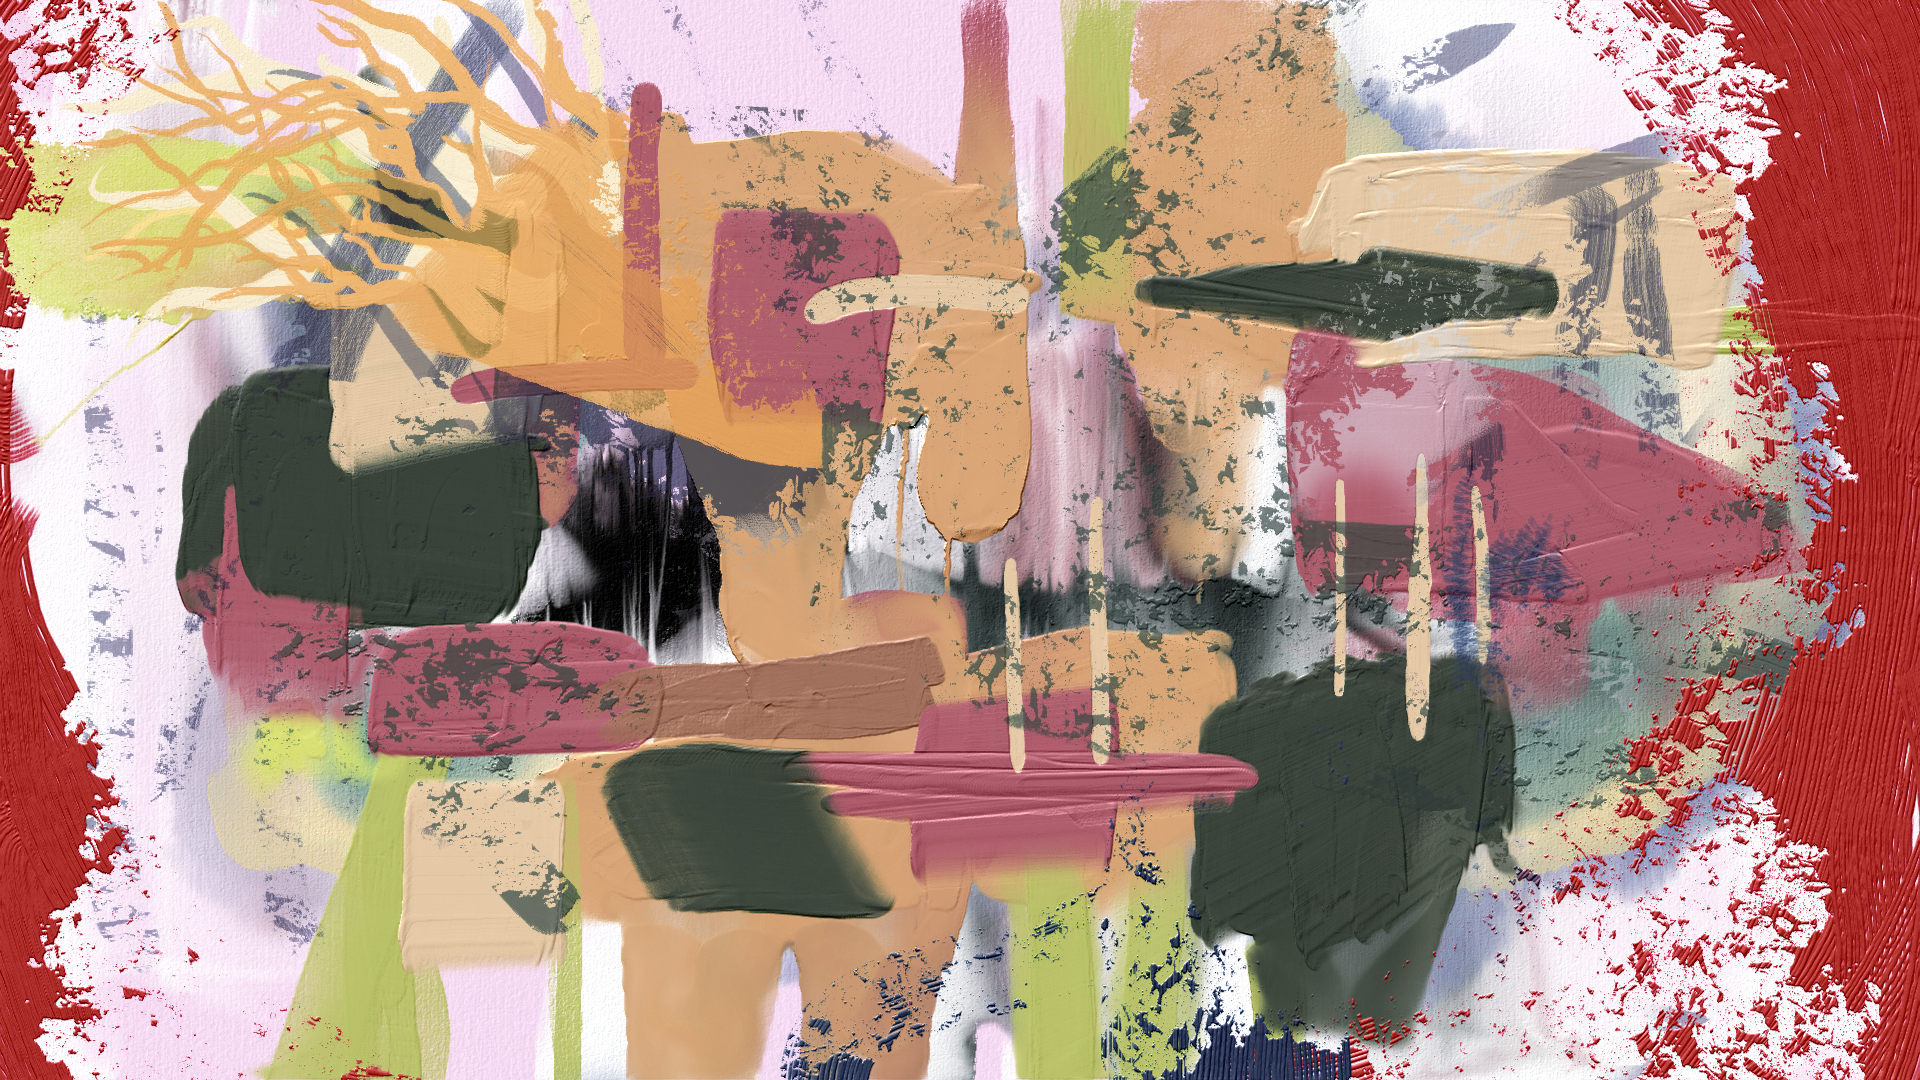 /images/abstractExpressionist/autumnBoatSmears.png